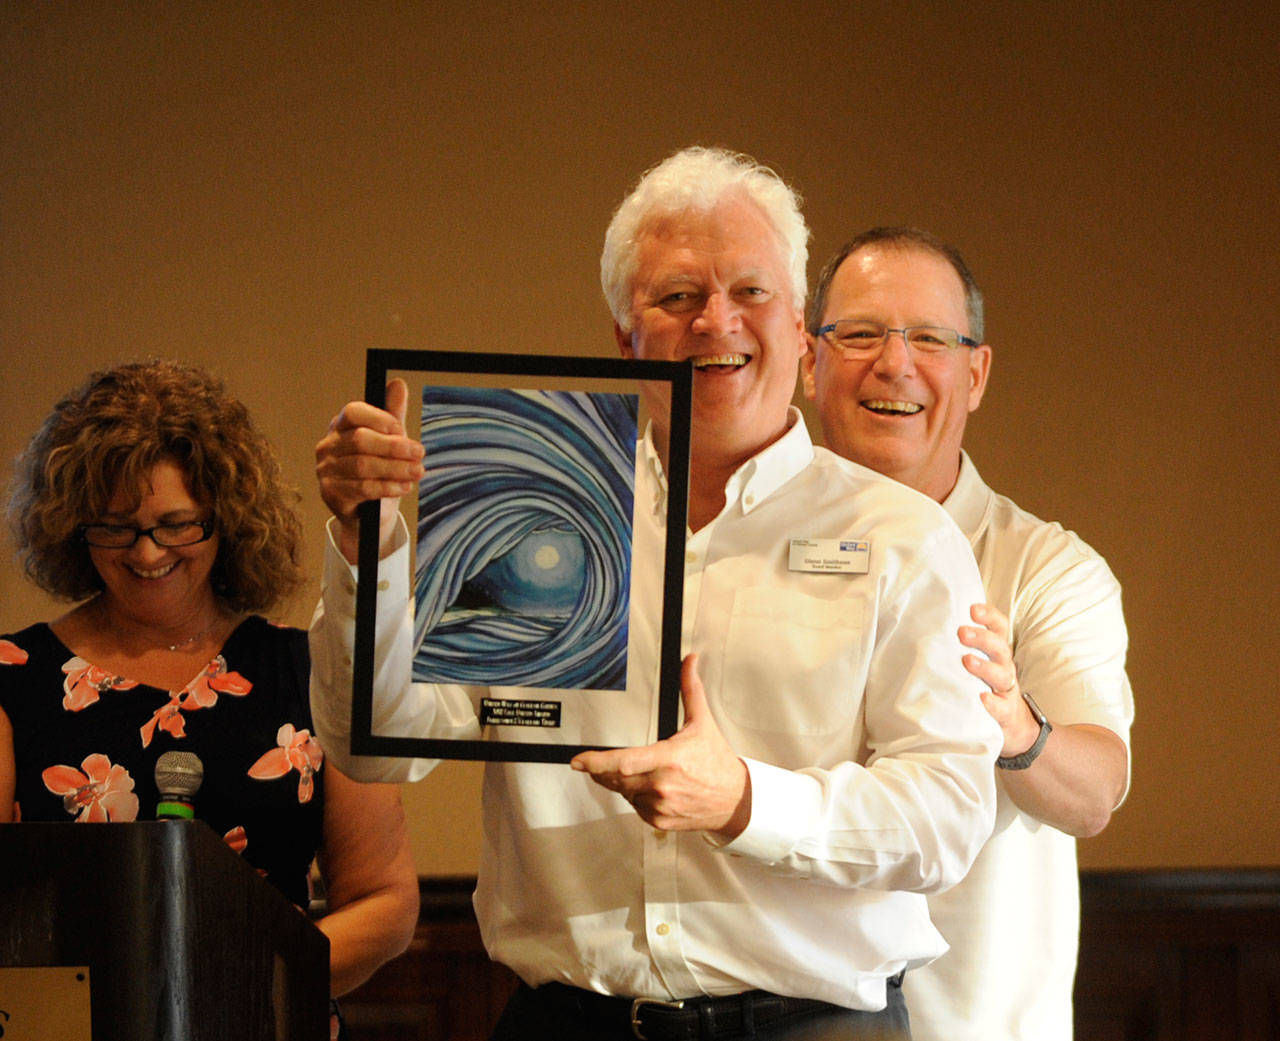 Glenn Smithson, 7 Cedars Casino General Manager, accepts a United Way of Clallam County award at the organization’s annual Campaign Celebration at The Cedars at Dungeness on Thursday. Presenting the award are 2018 campaign chair Lori Taylor and board member/2017 campaign chair Chris Szczepczynski. (Michael Dashiell/Olympic Peninsula News Group)